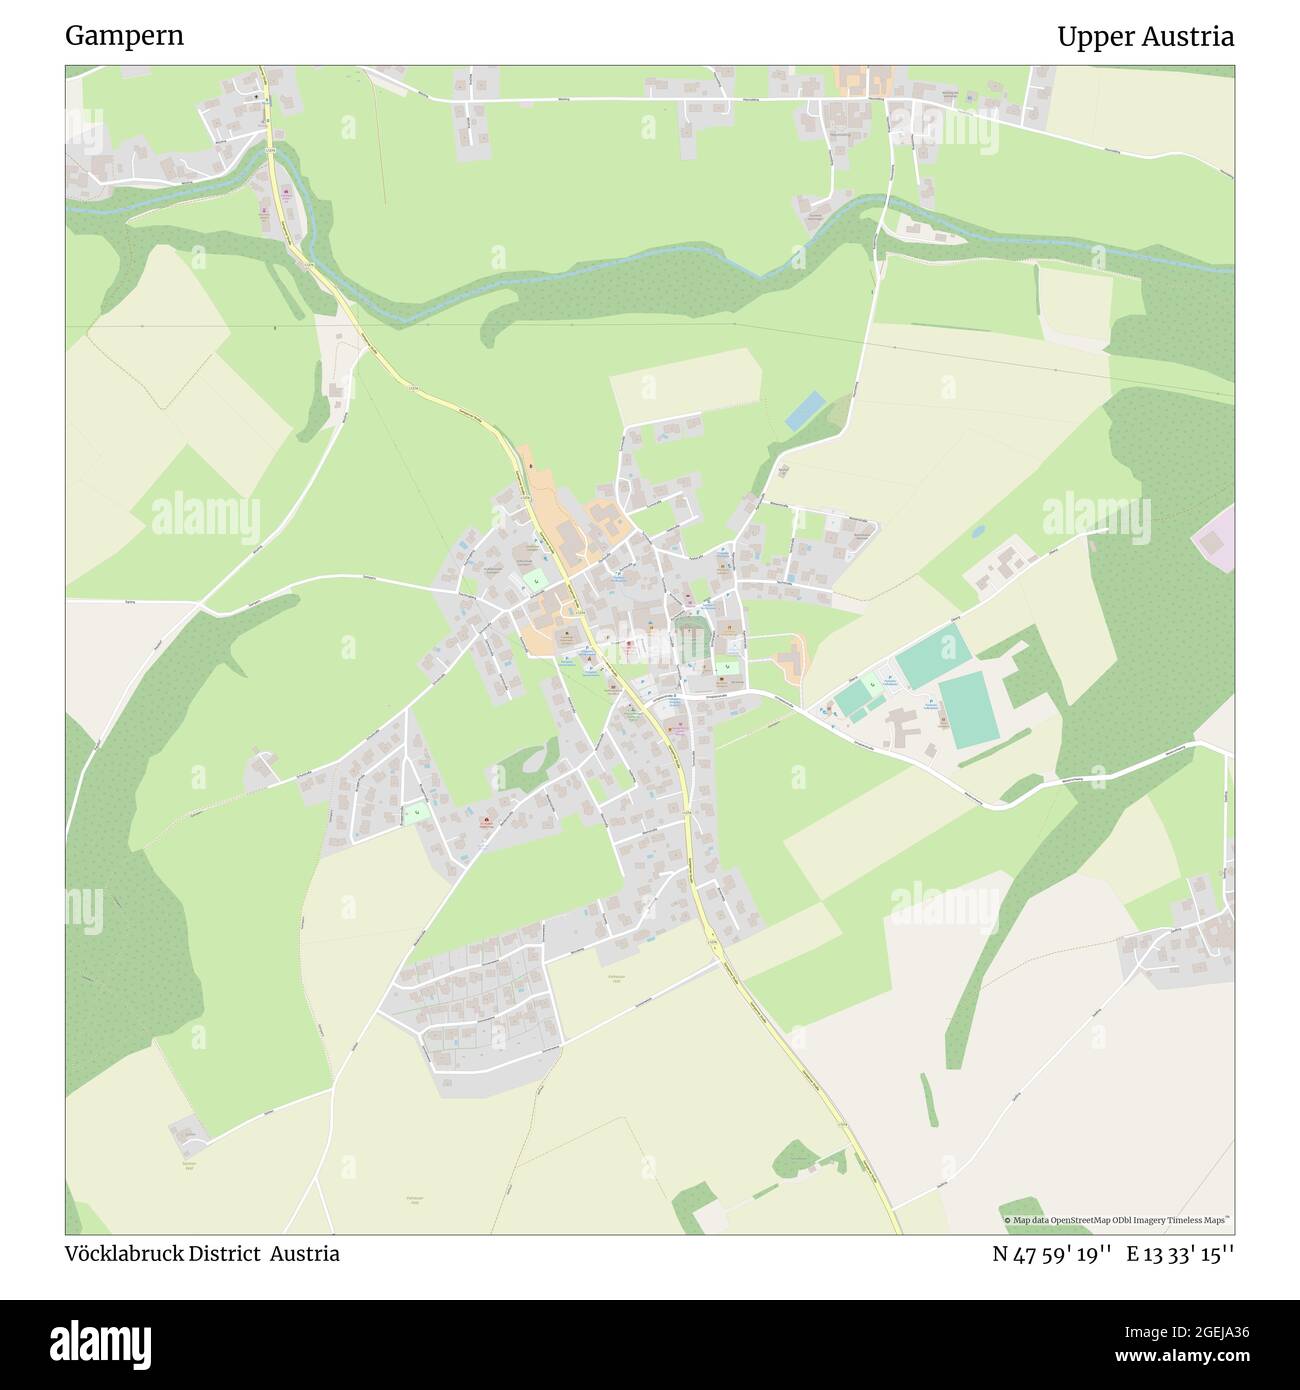 Gampern, Vöcklabruck District, Austria, Upper Austria, N 47 59' 19'', E 13 33' 15'', map, Timeless Map published in 2021. Travelers, explorers and adventurers like Florence Nightingale, David Livingstone, Ernest Shackleton, Lewis and Clark and Sherlock Holmes relied on maps to plan travels to the world's most remote corners, Timeless Maps is mapping most locations on the globe, showing the achievement of great dreams Stock Photo